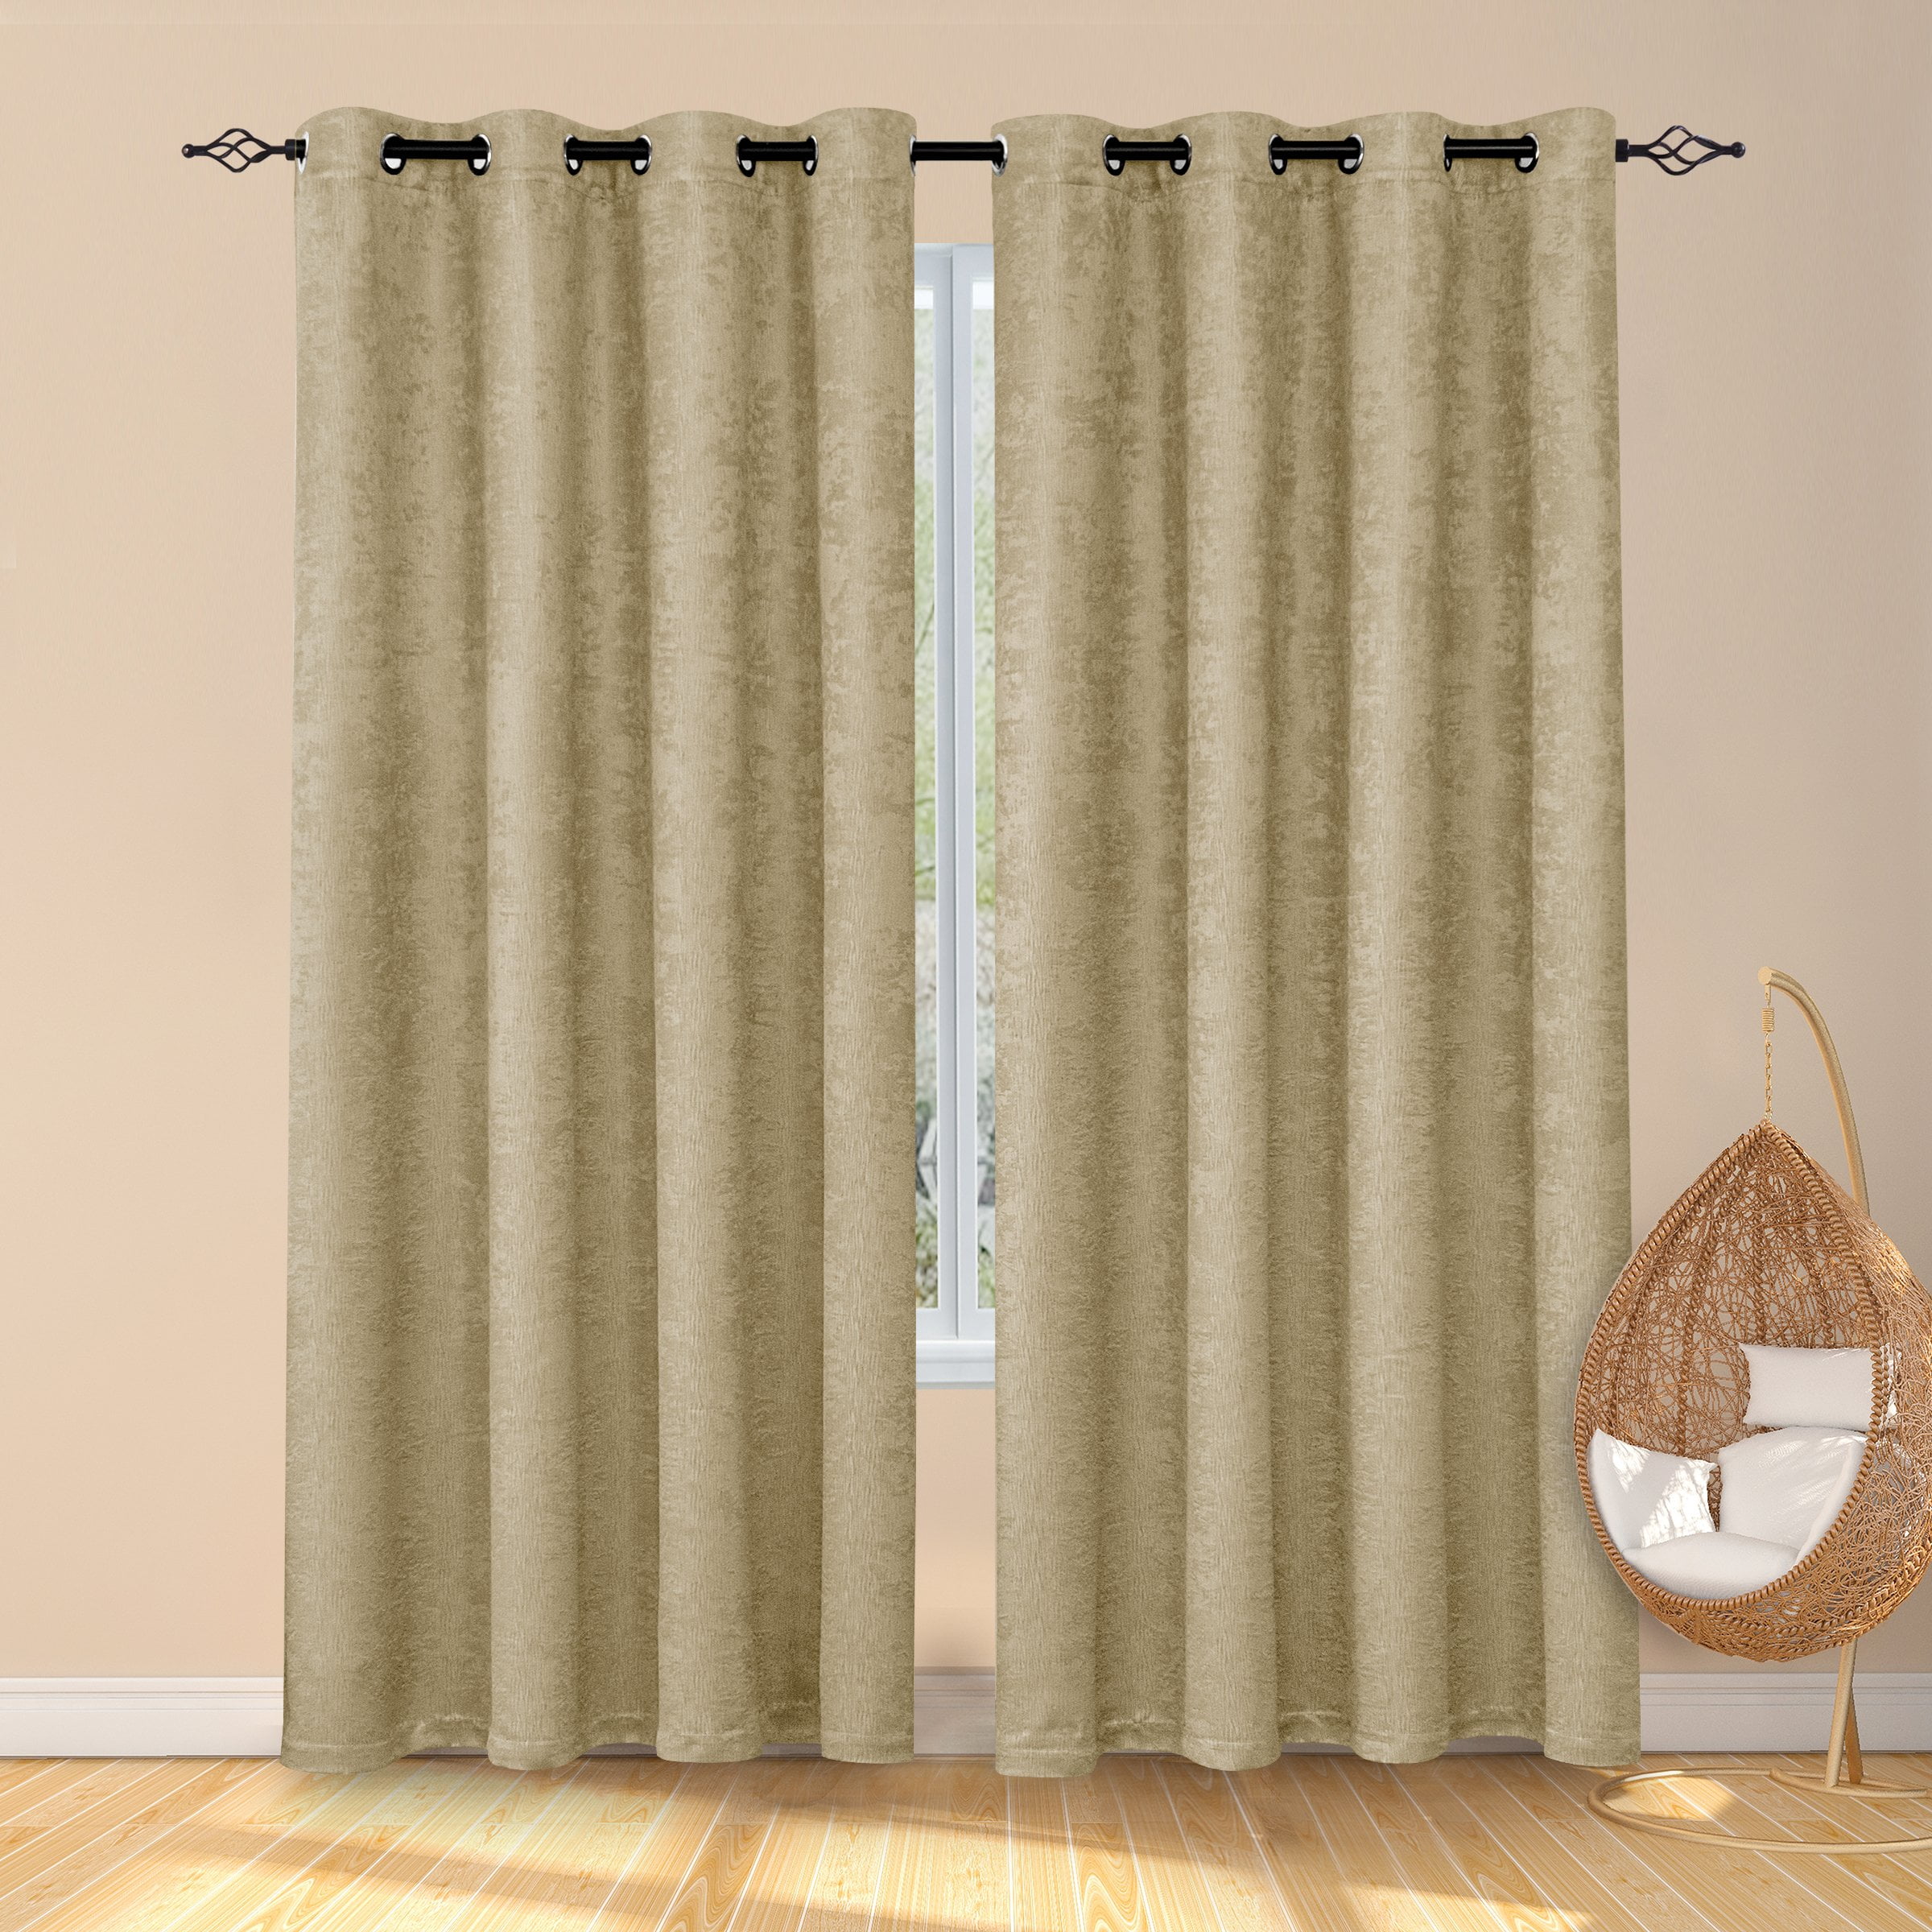 PATIO CURTAIN PROTECTION AGAINST SUN AND WIND CANOPY Details about   TAILOR MADE CURTAIN 